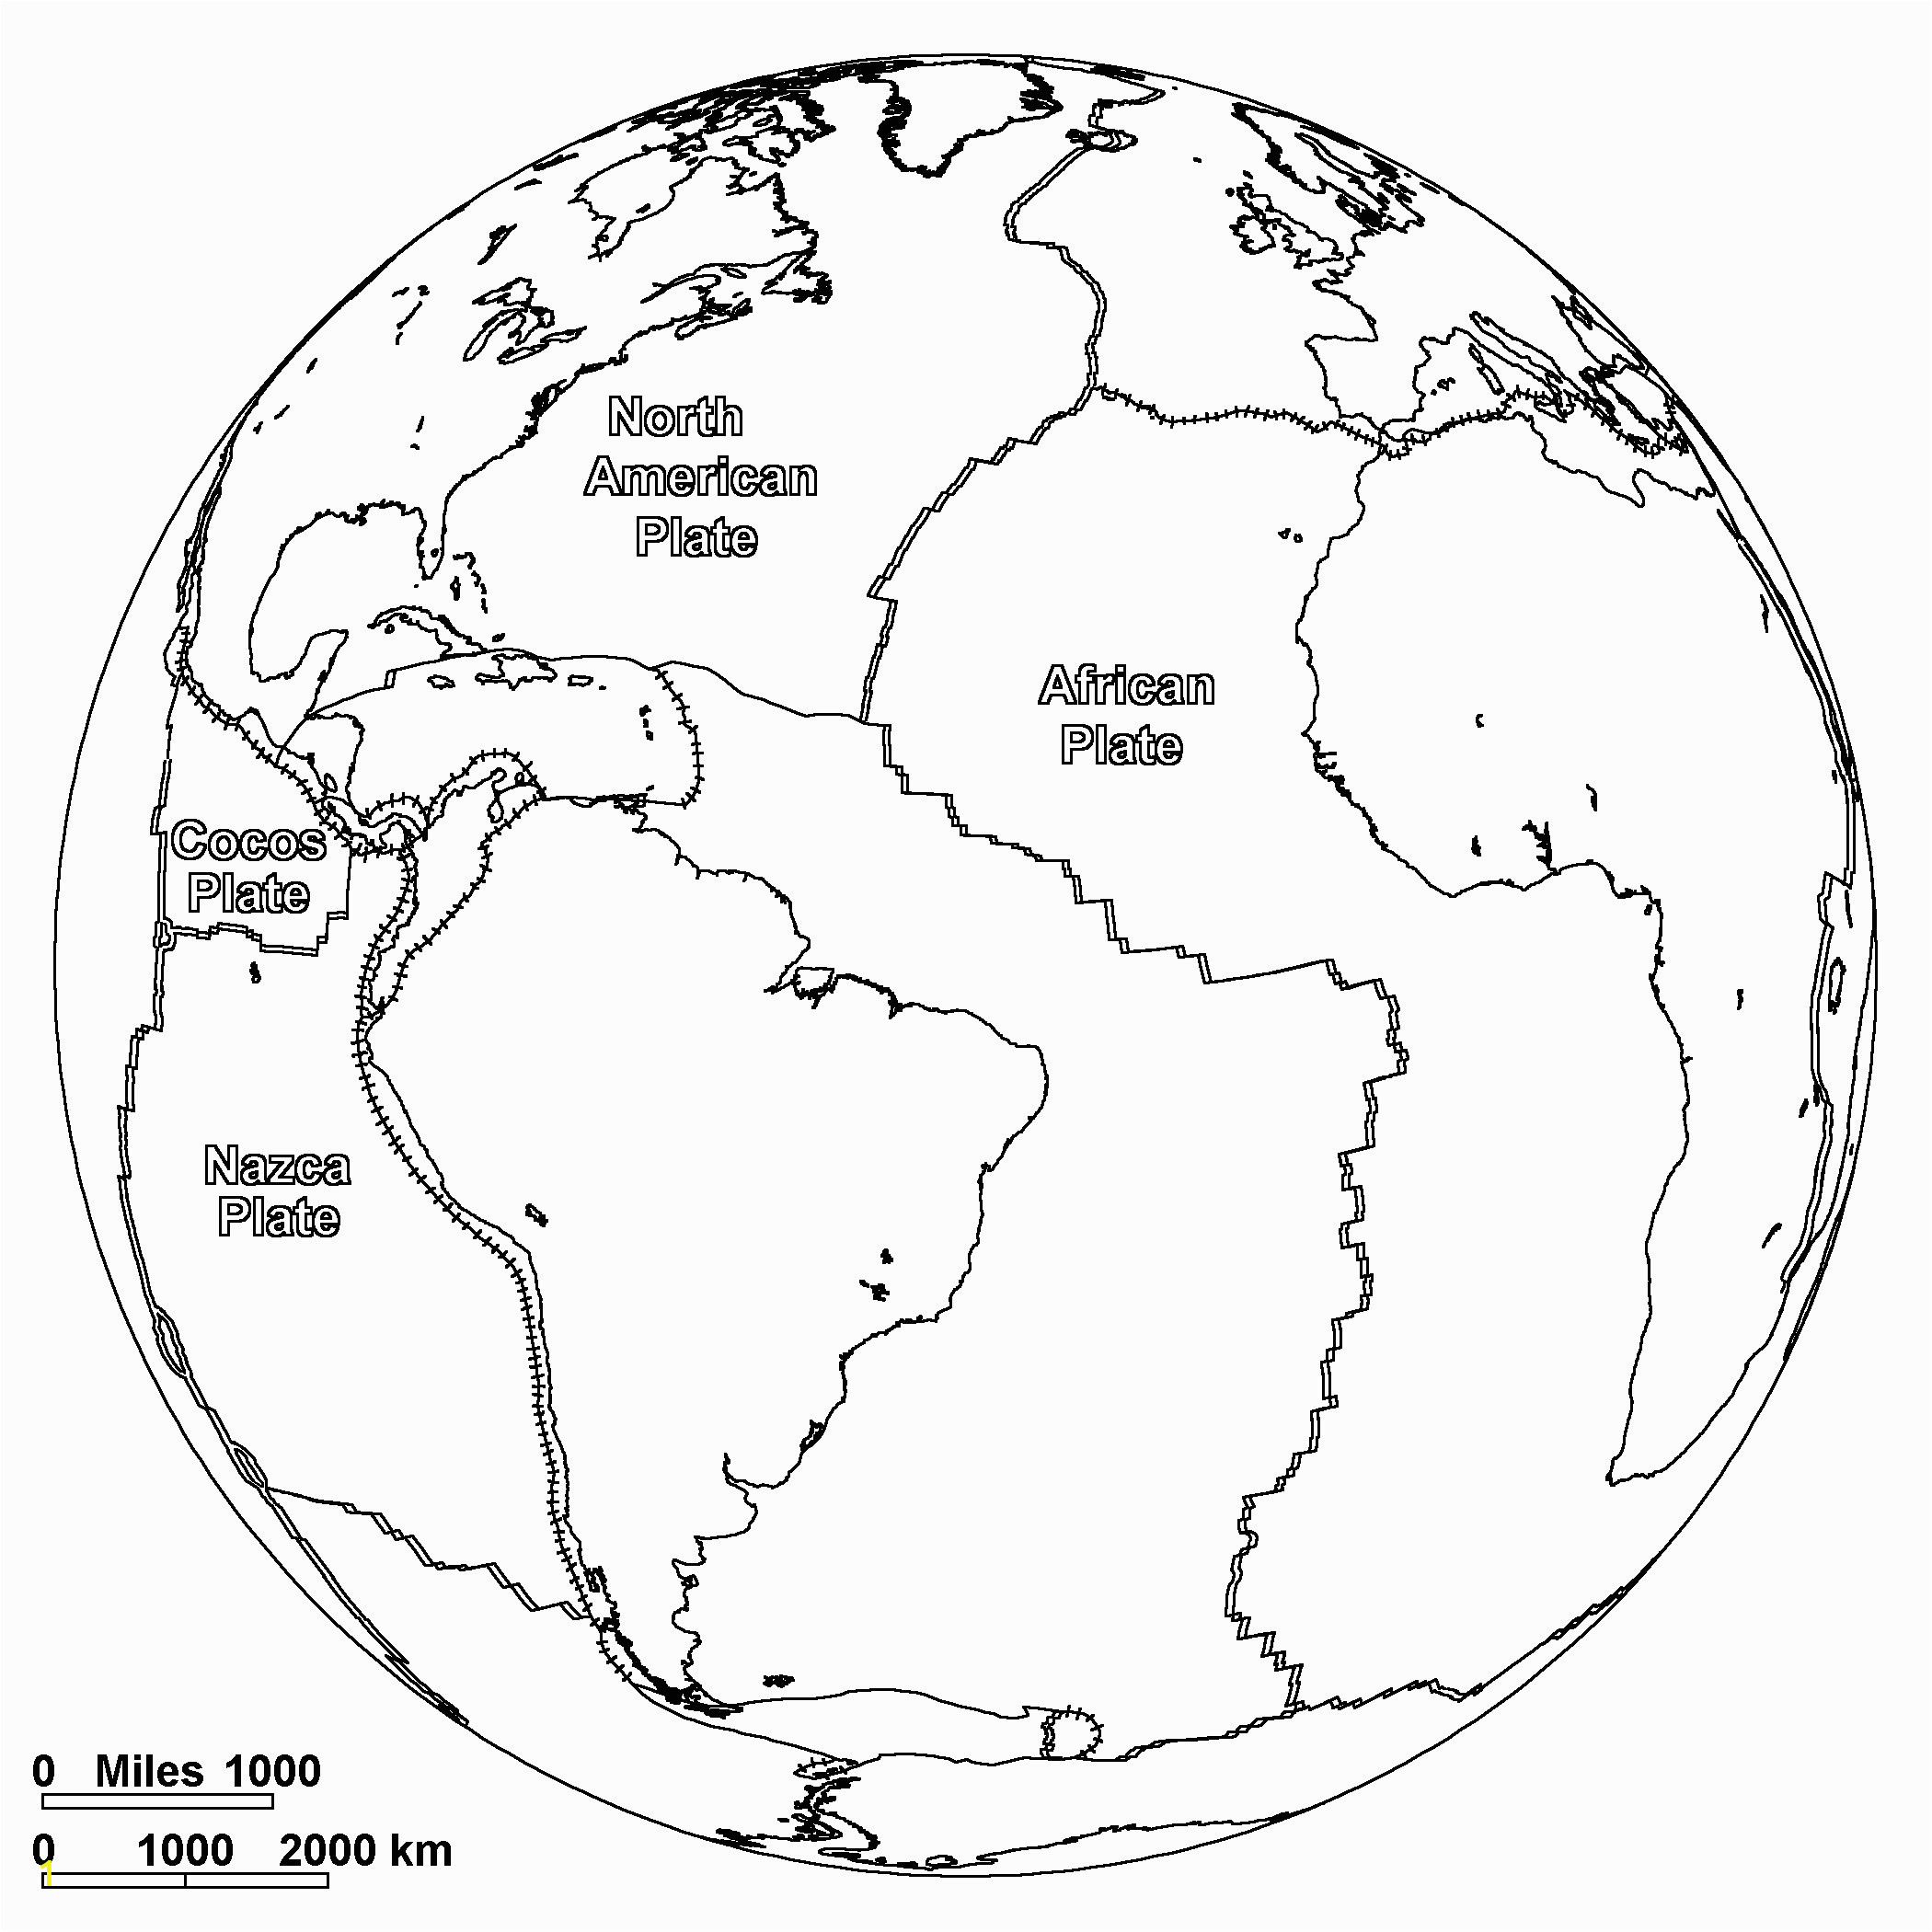 Free Printable World Map Coloring Pages Free Printable World Map Coloring Pages for Kids Best